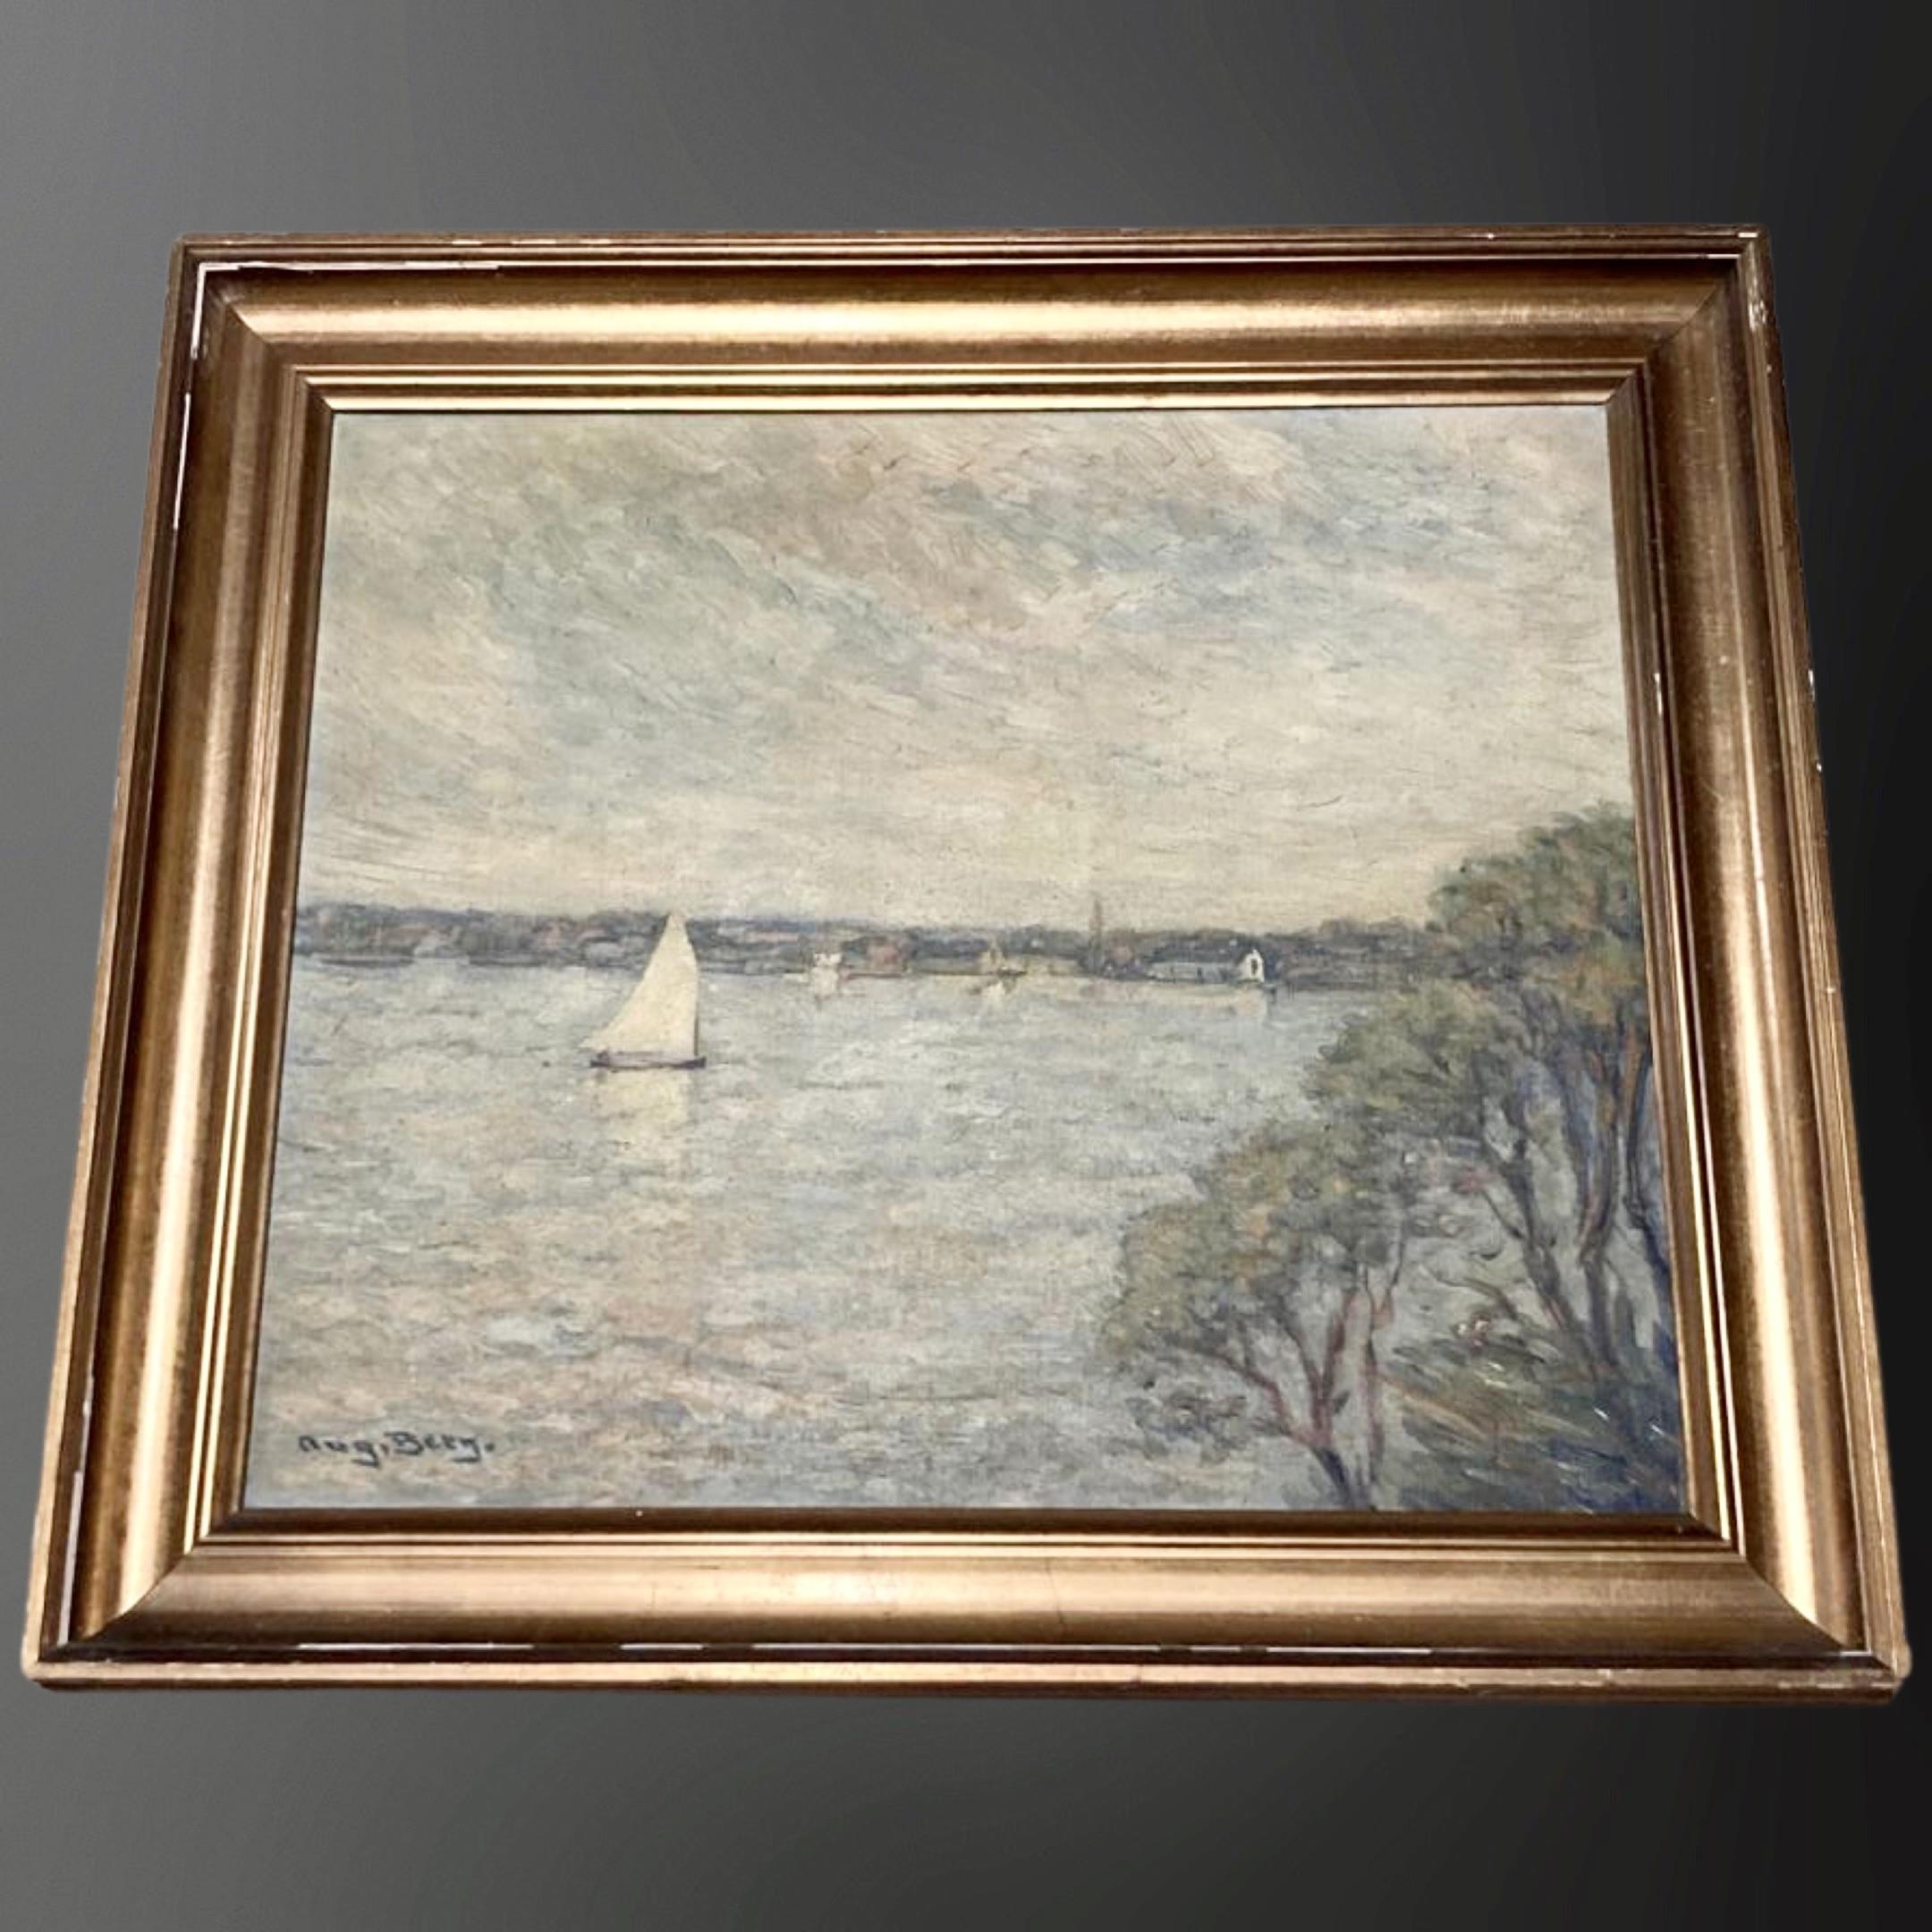 Aug Berg : Boats on lake, oil on canvas